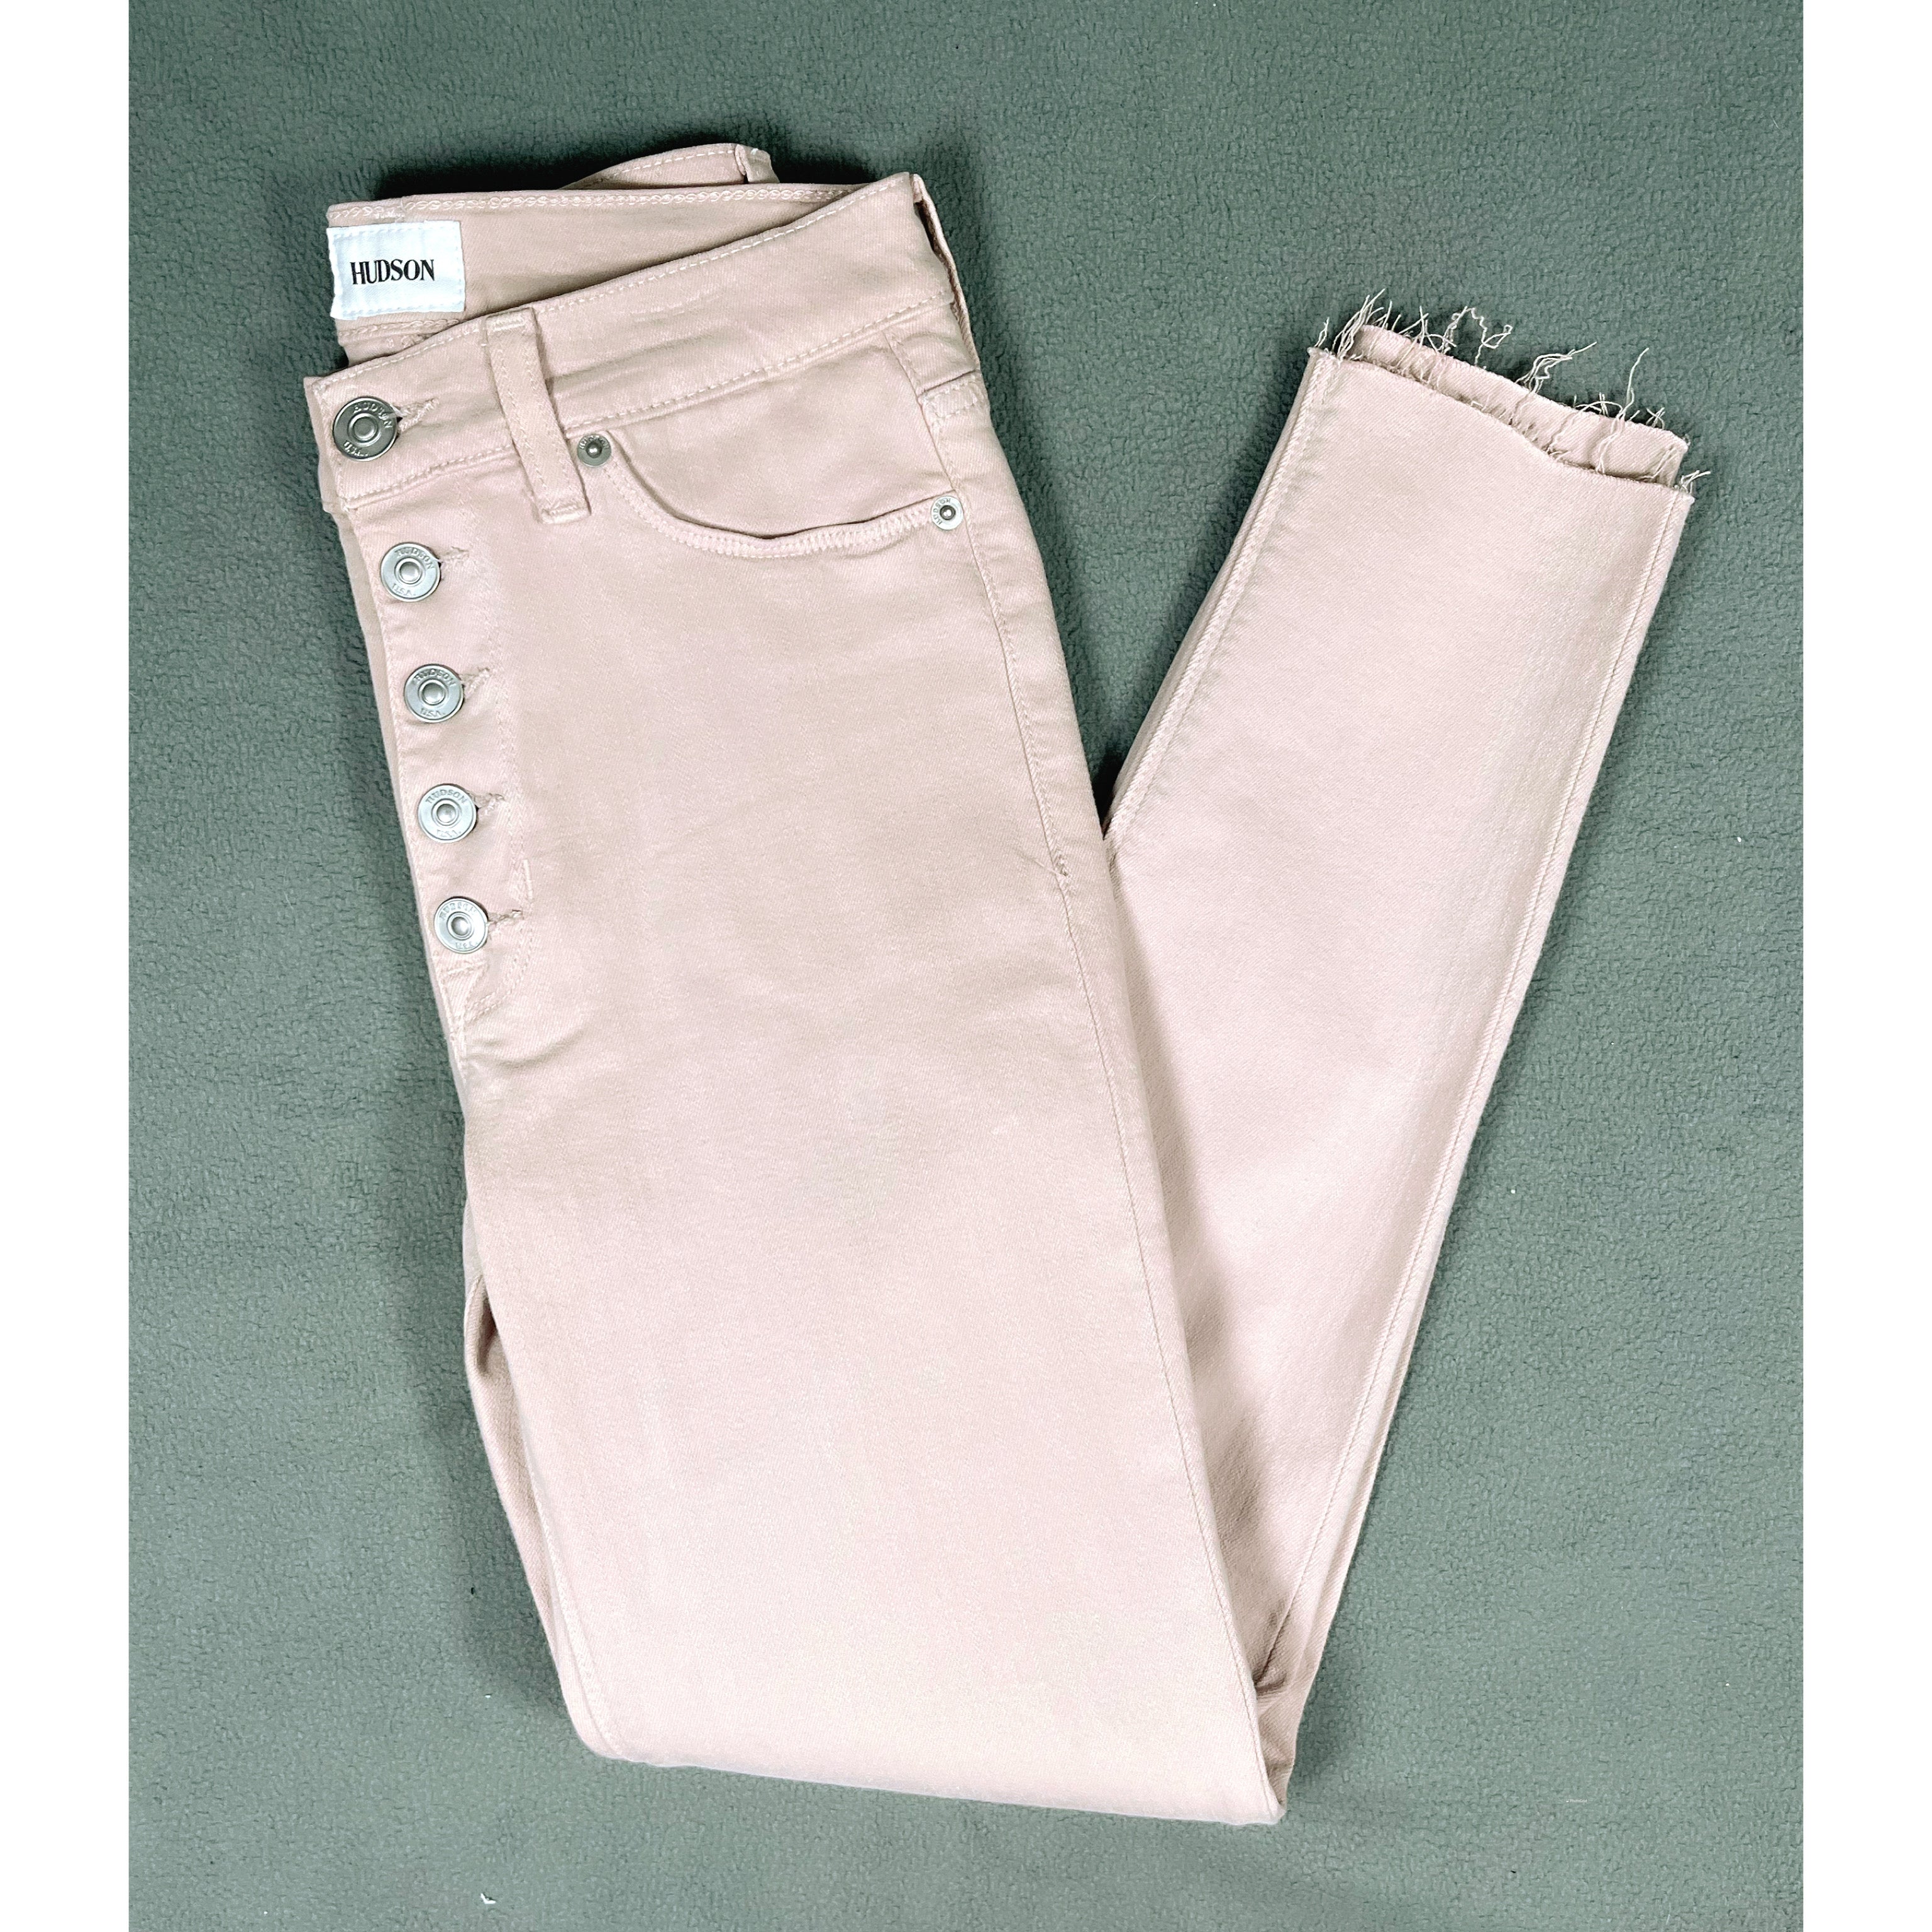 Hudson blush Barbara Super Skinny jeans, size 27, NEW WITHOUT TAGS!